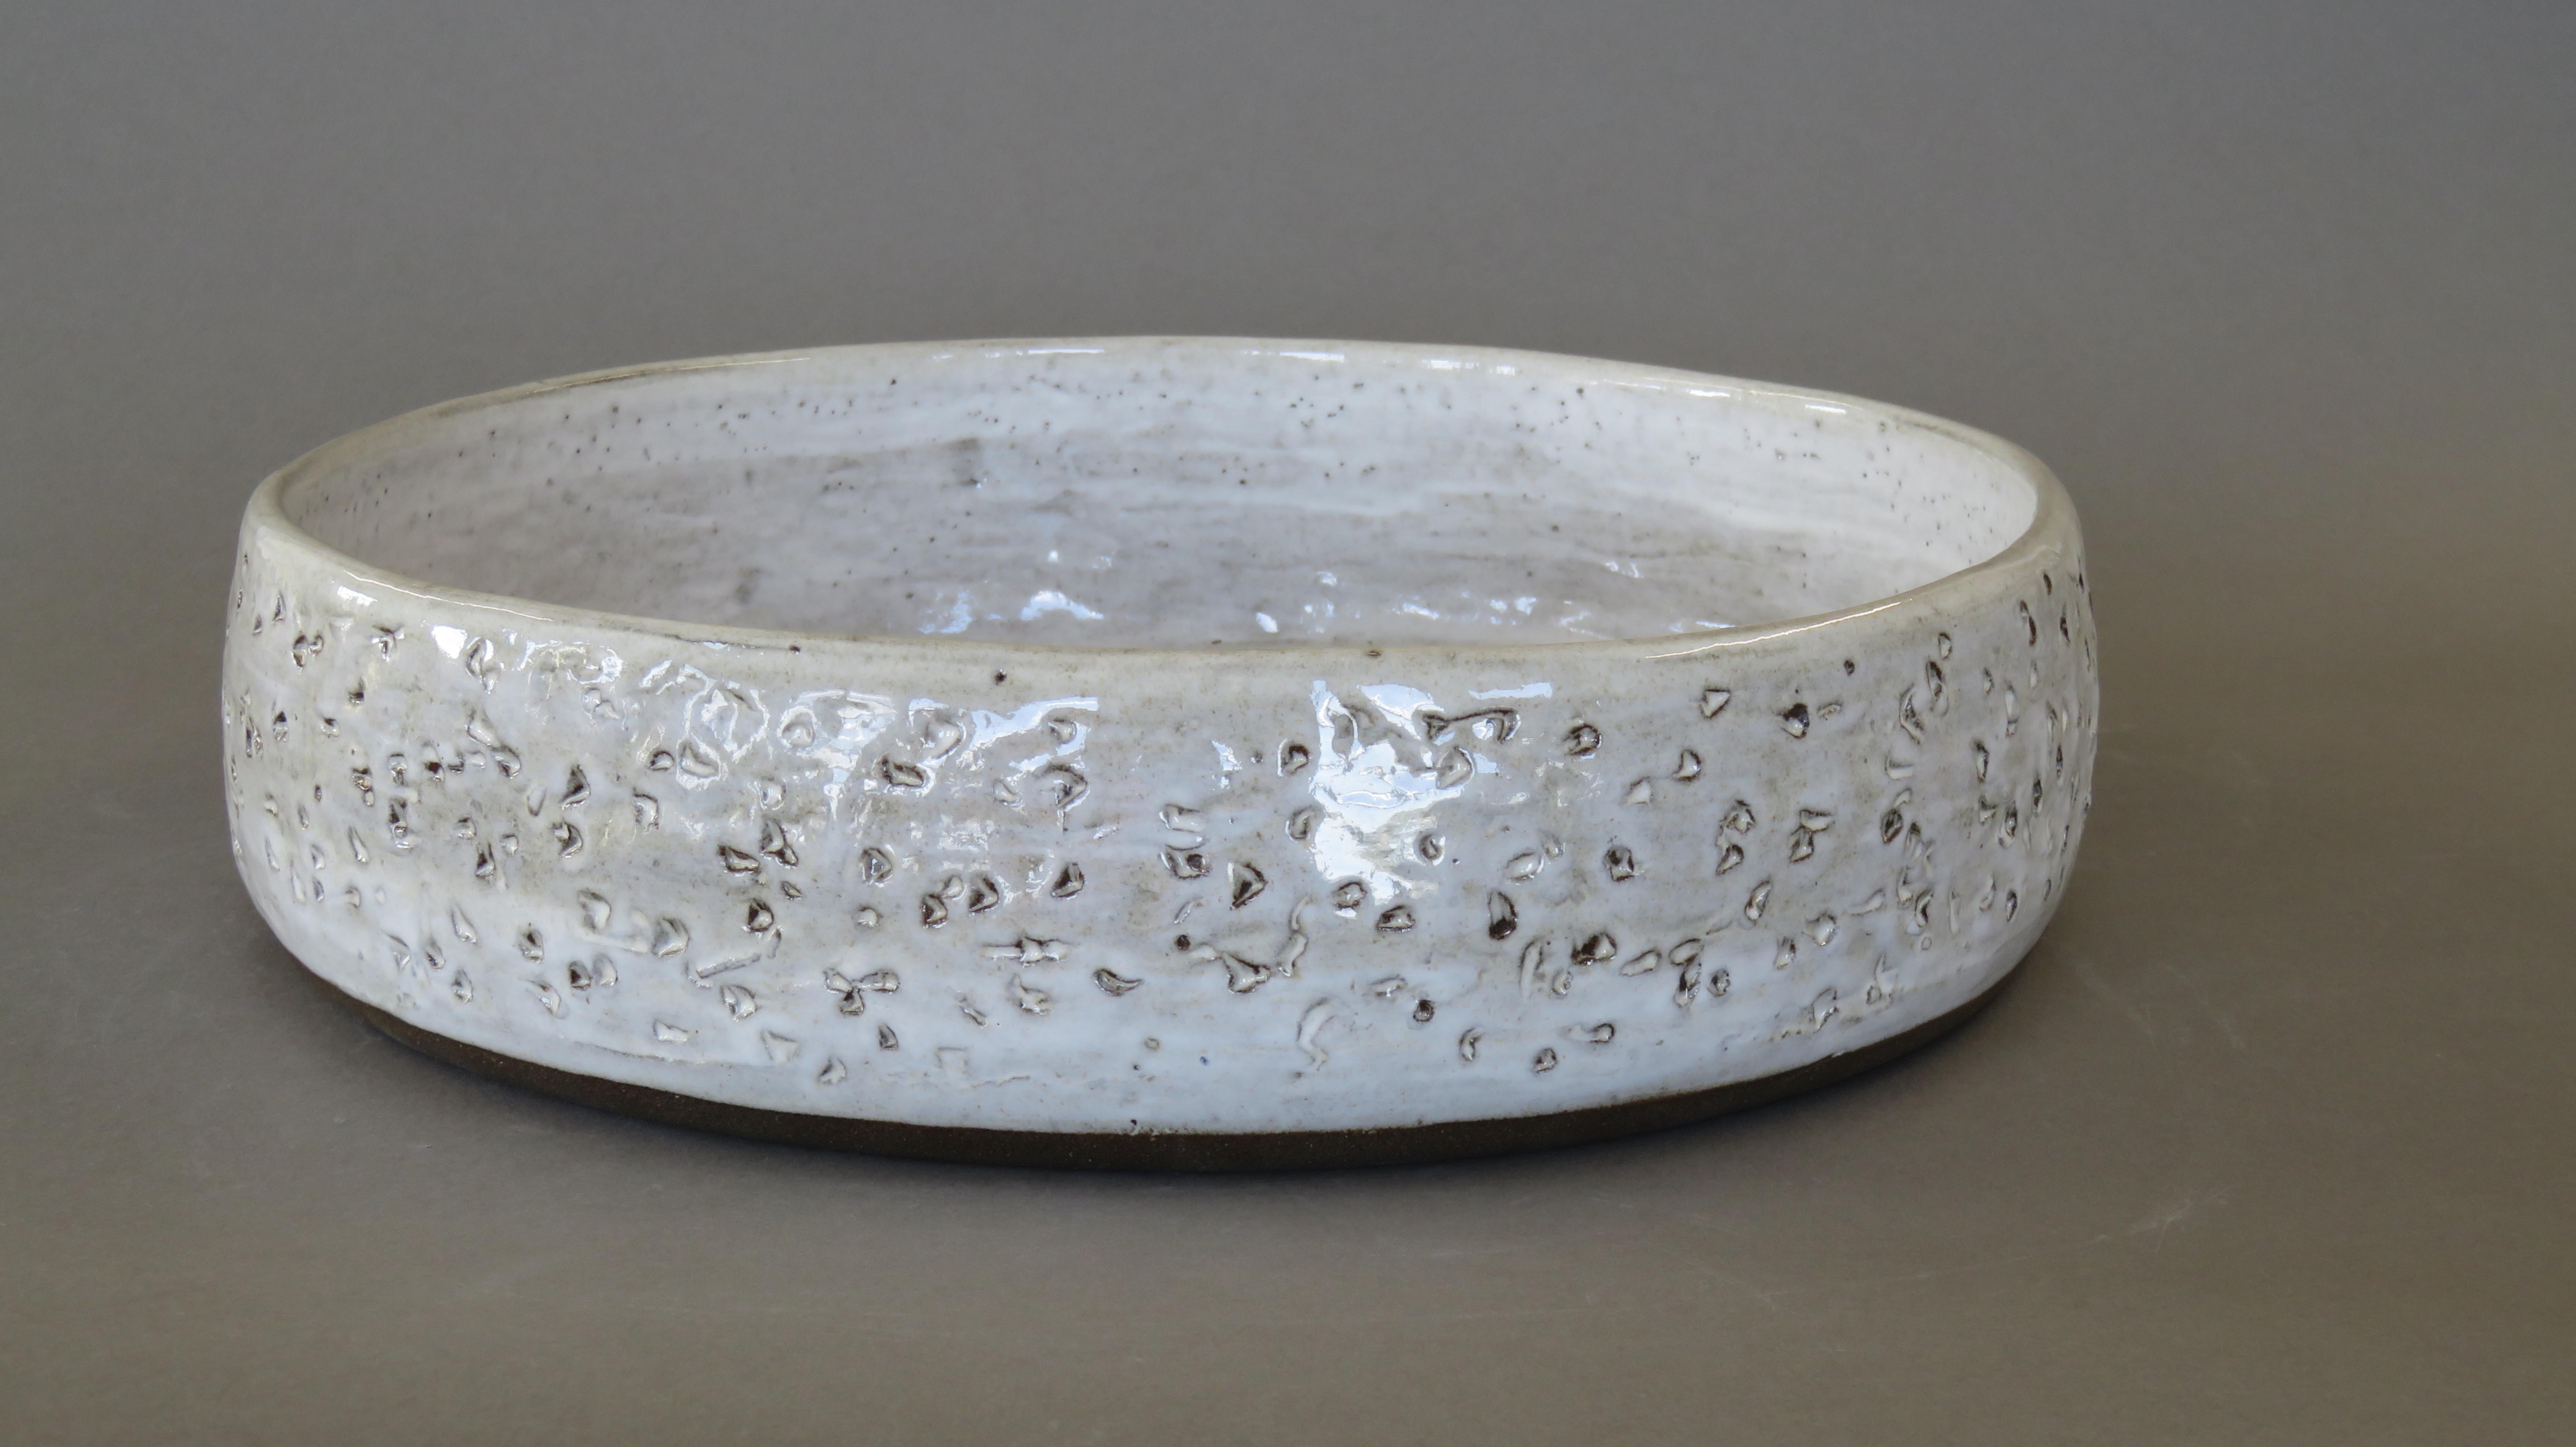 Large, wide and low ceramic stoneware serving bowl or center piece. 13.75 inches in diameter.
Random, notched hand-carved markings on the exterior with rich creamy white glaze on the interior.  The brown stoneware clay shows through the carvings